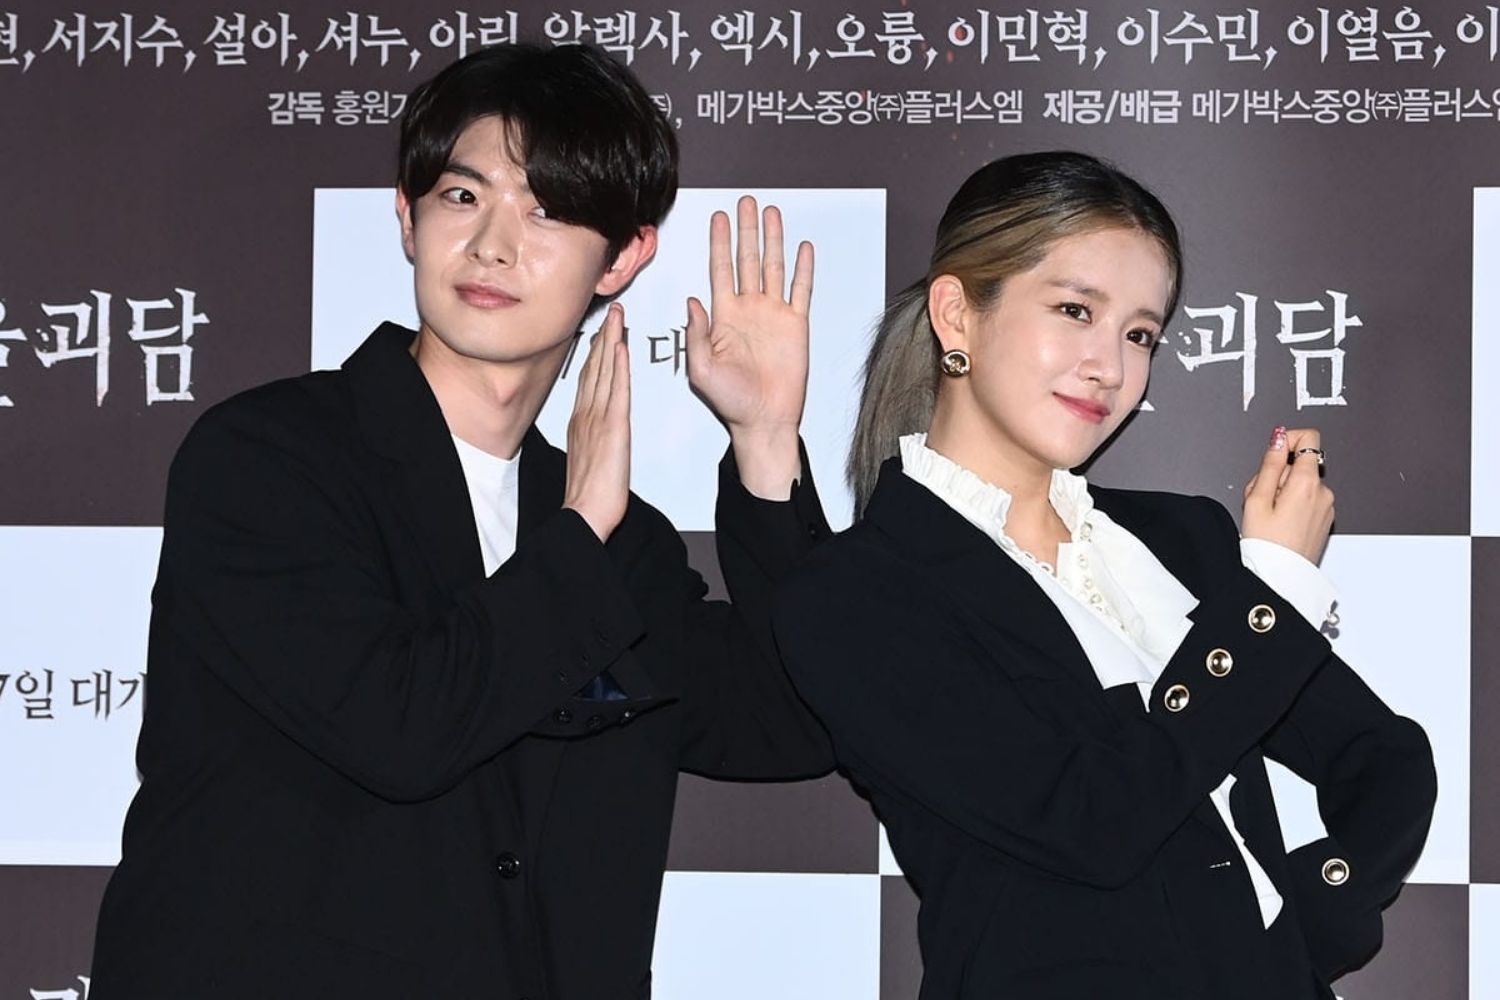 Seoul Ghost Story Cast-Exy and Jung Won Chang